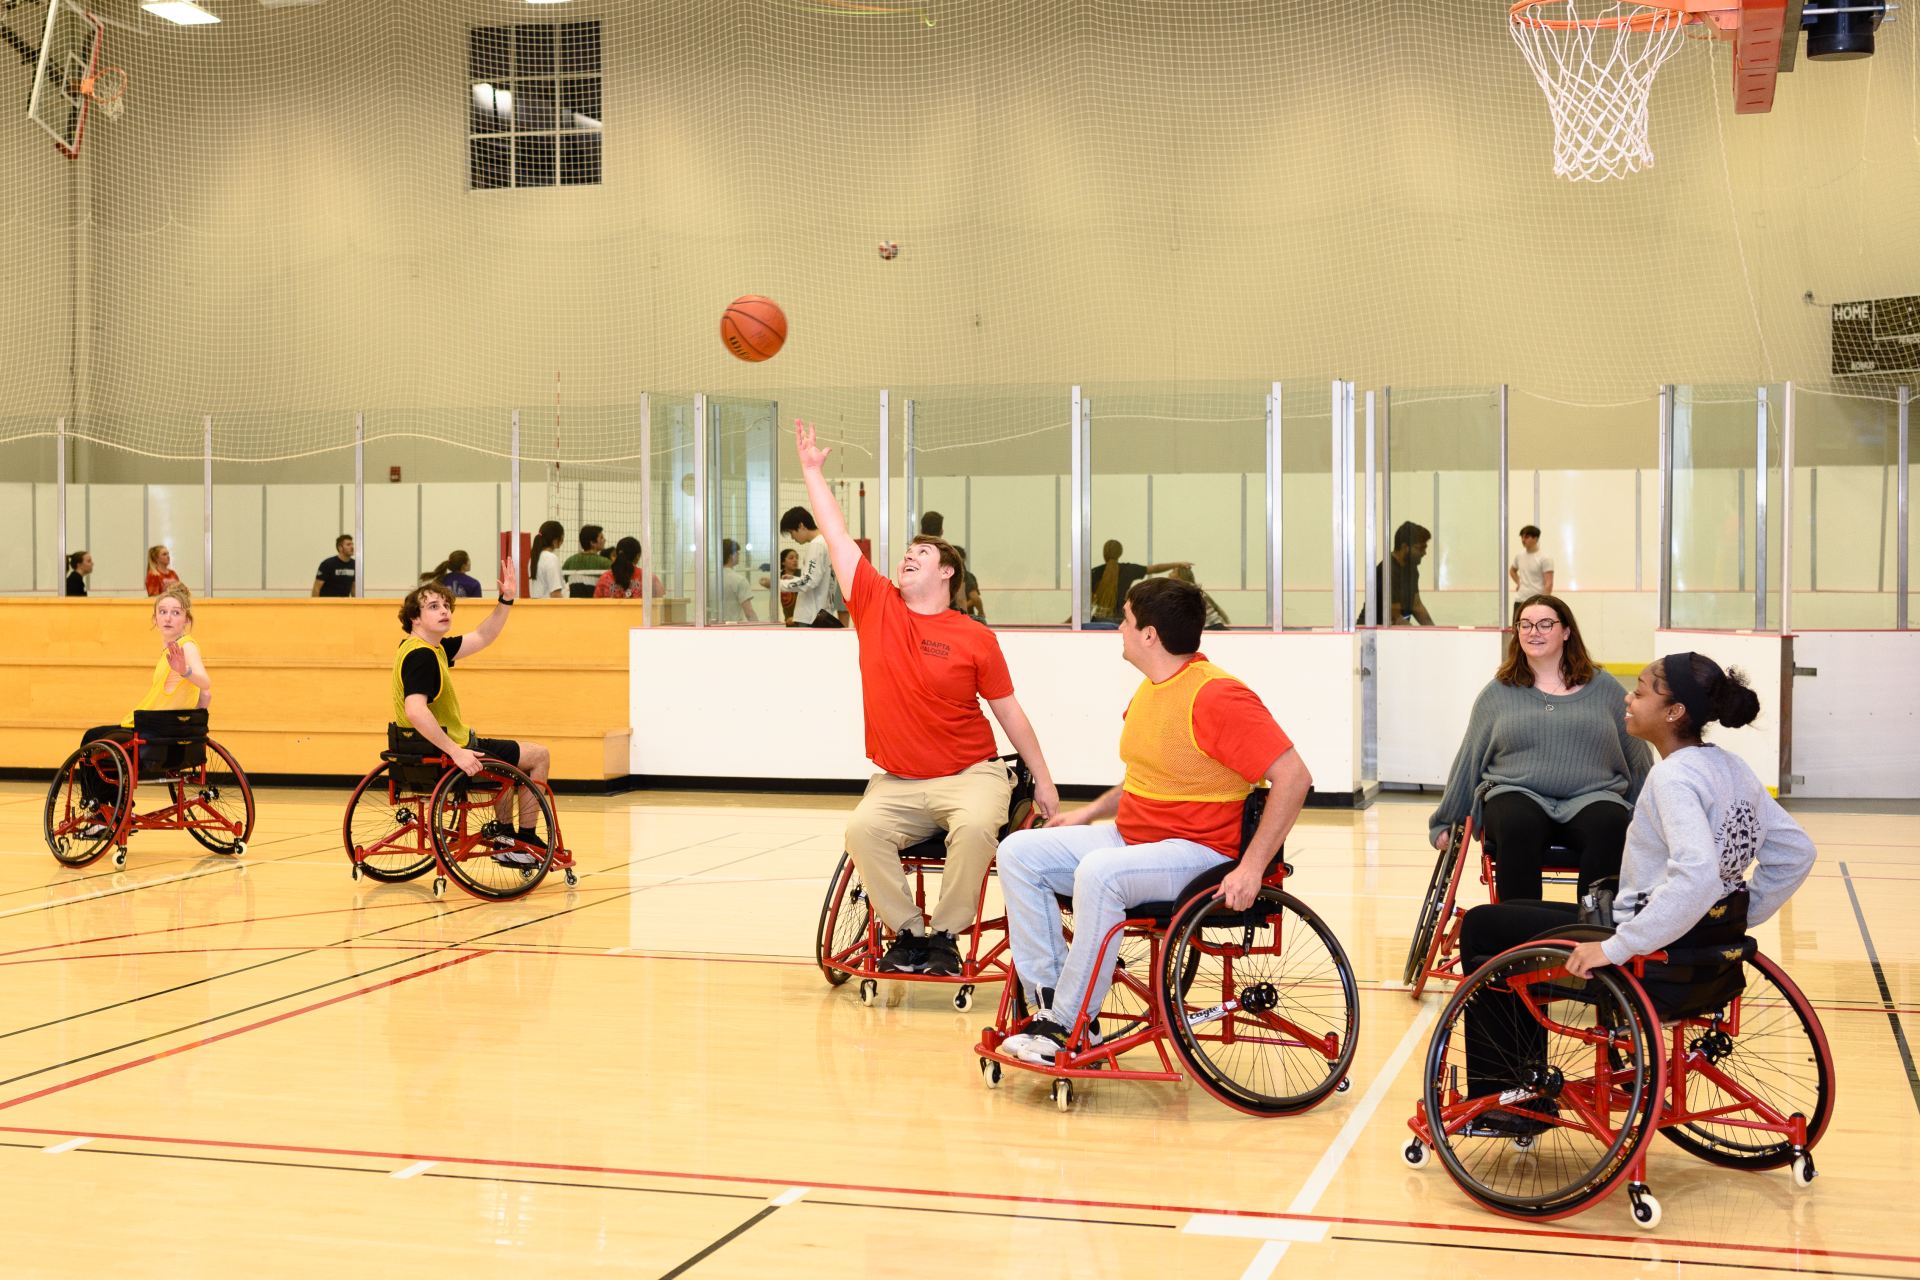 A student in a wheelchair reaches up to catch a basketball